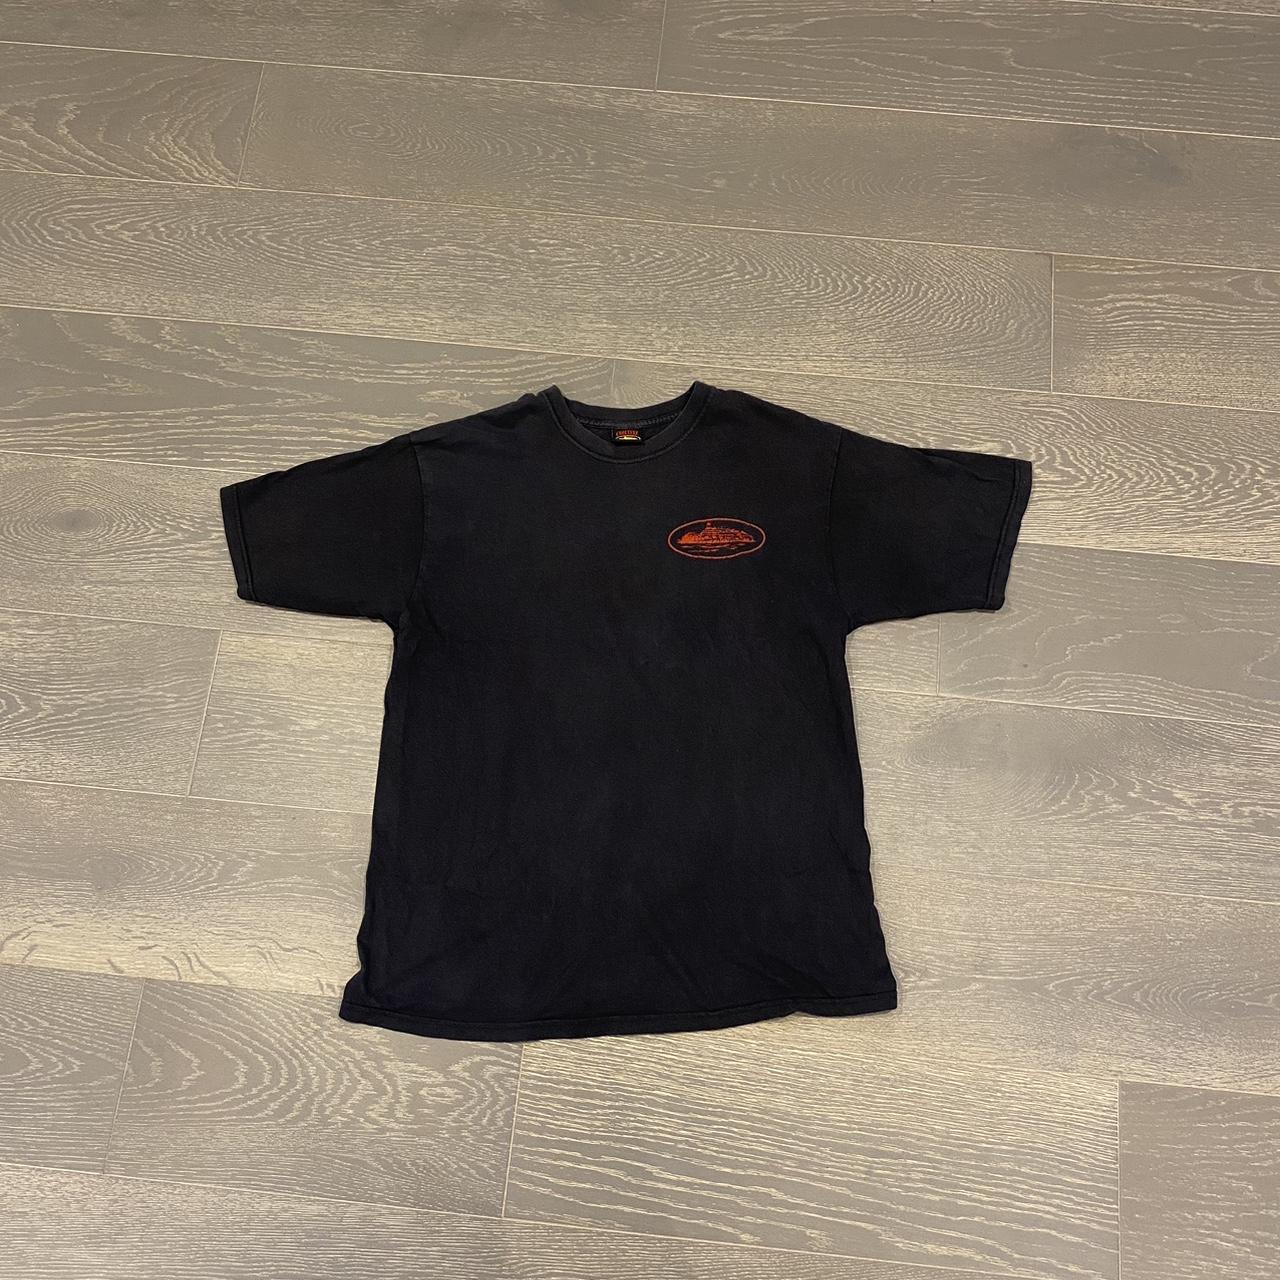 Cortiez RTW black and red tee Size L Condition:... - Depop